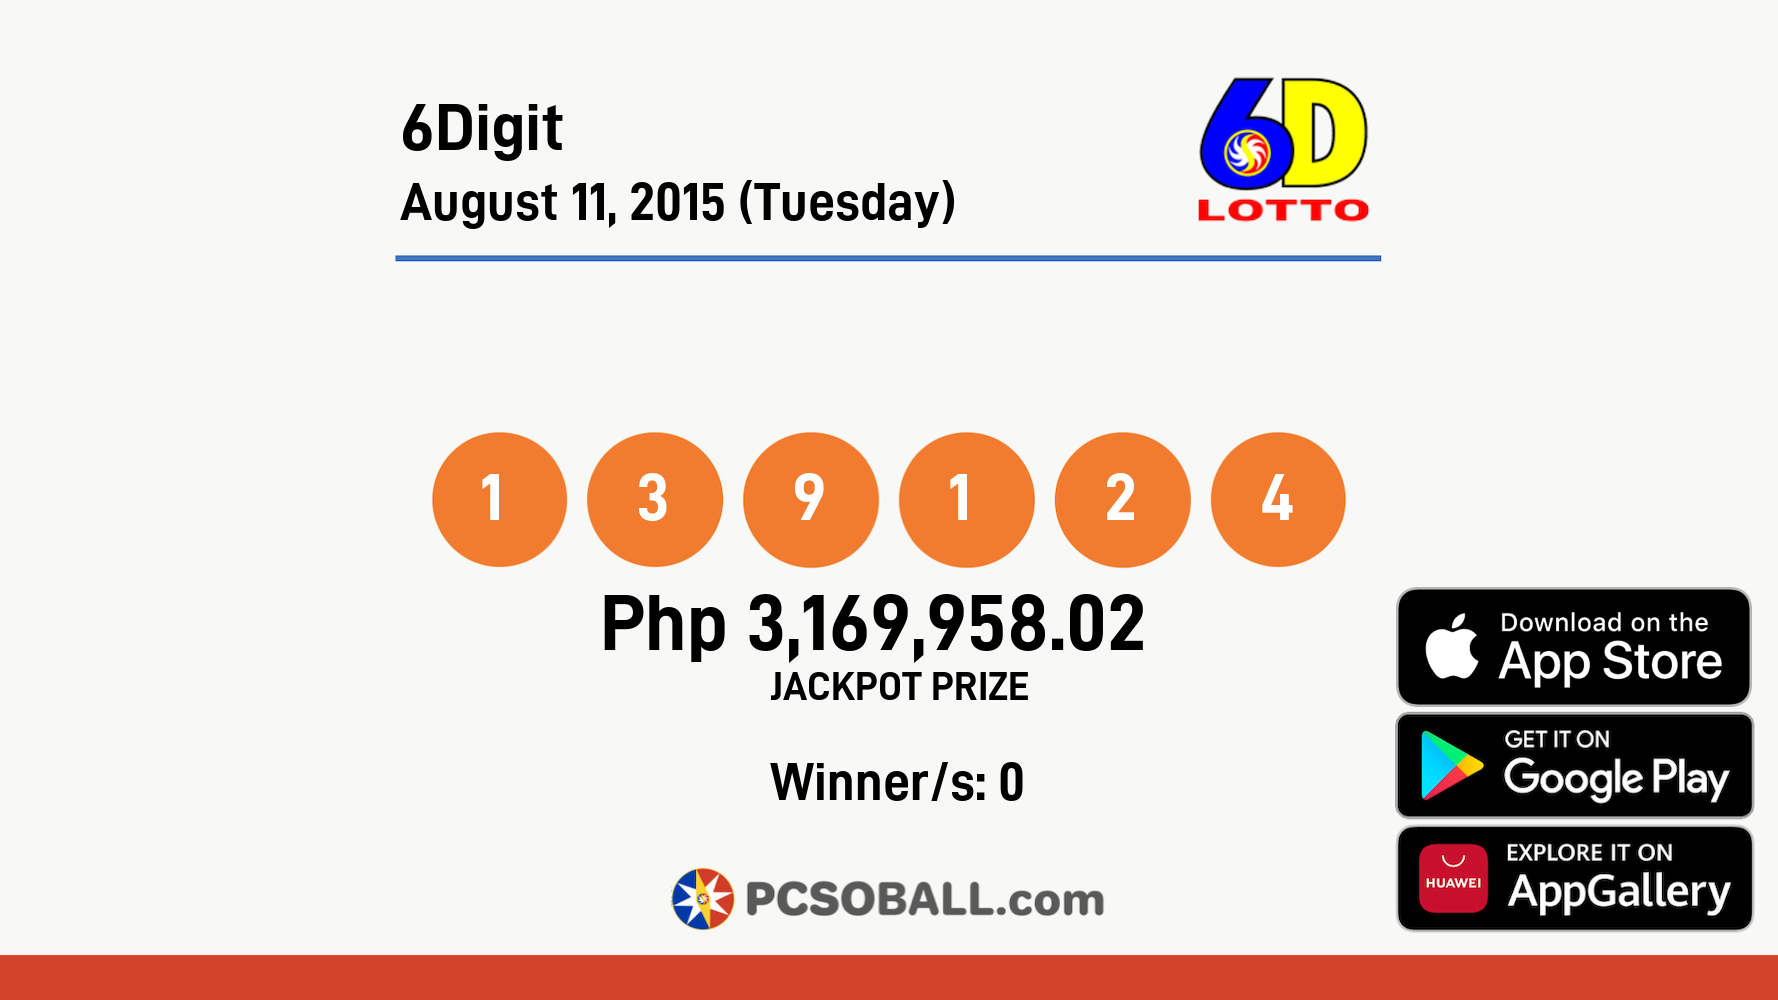 6Digit August 11, 2015 (Tuesday) Result